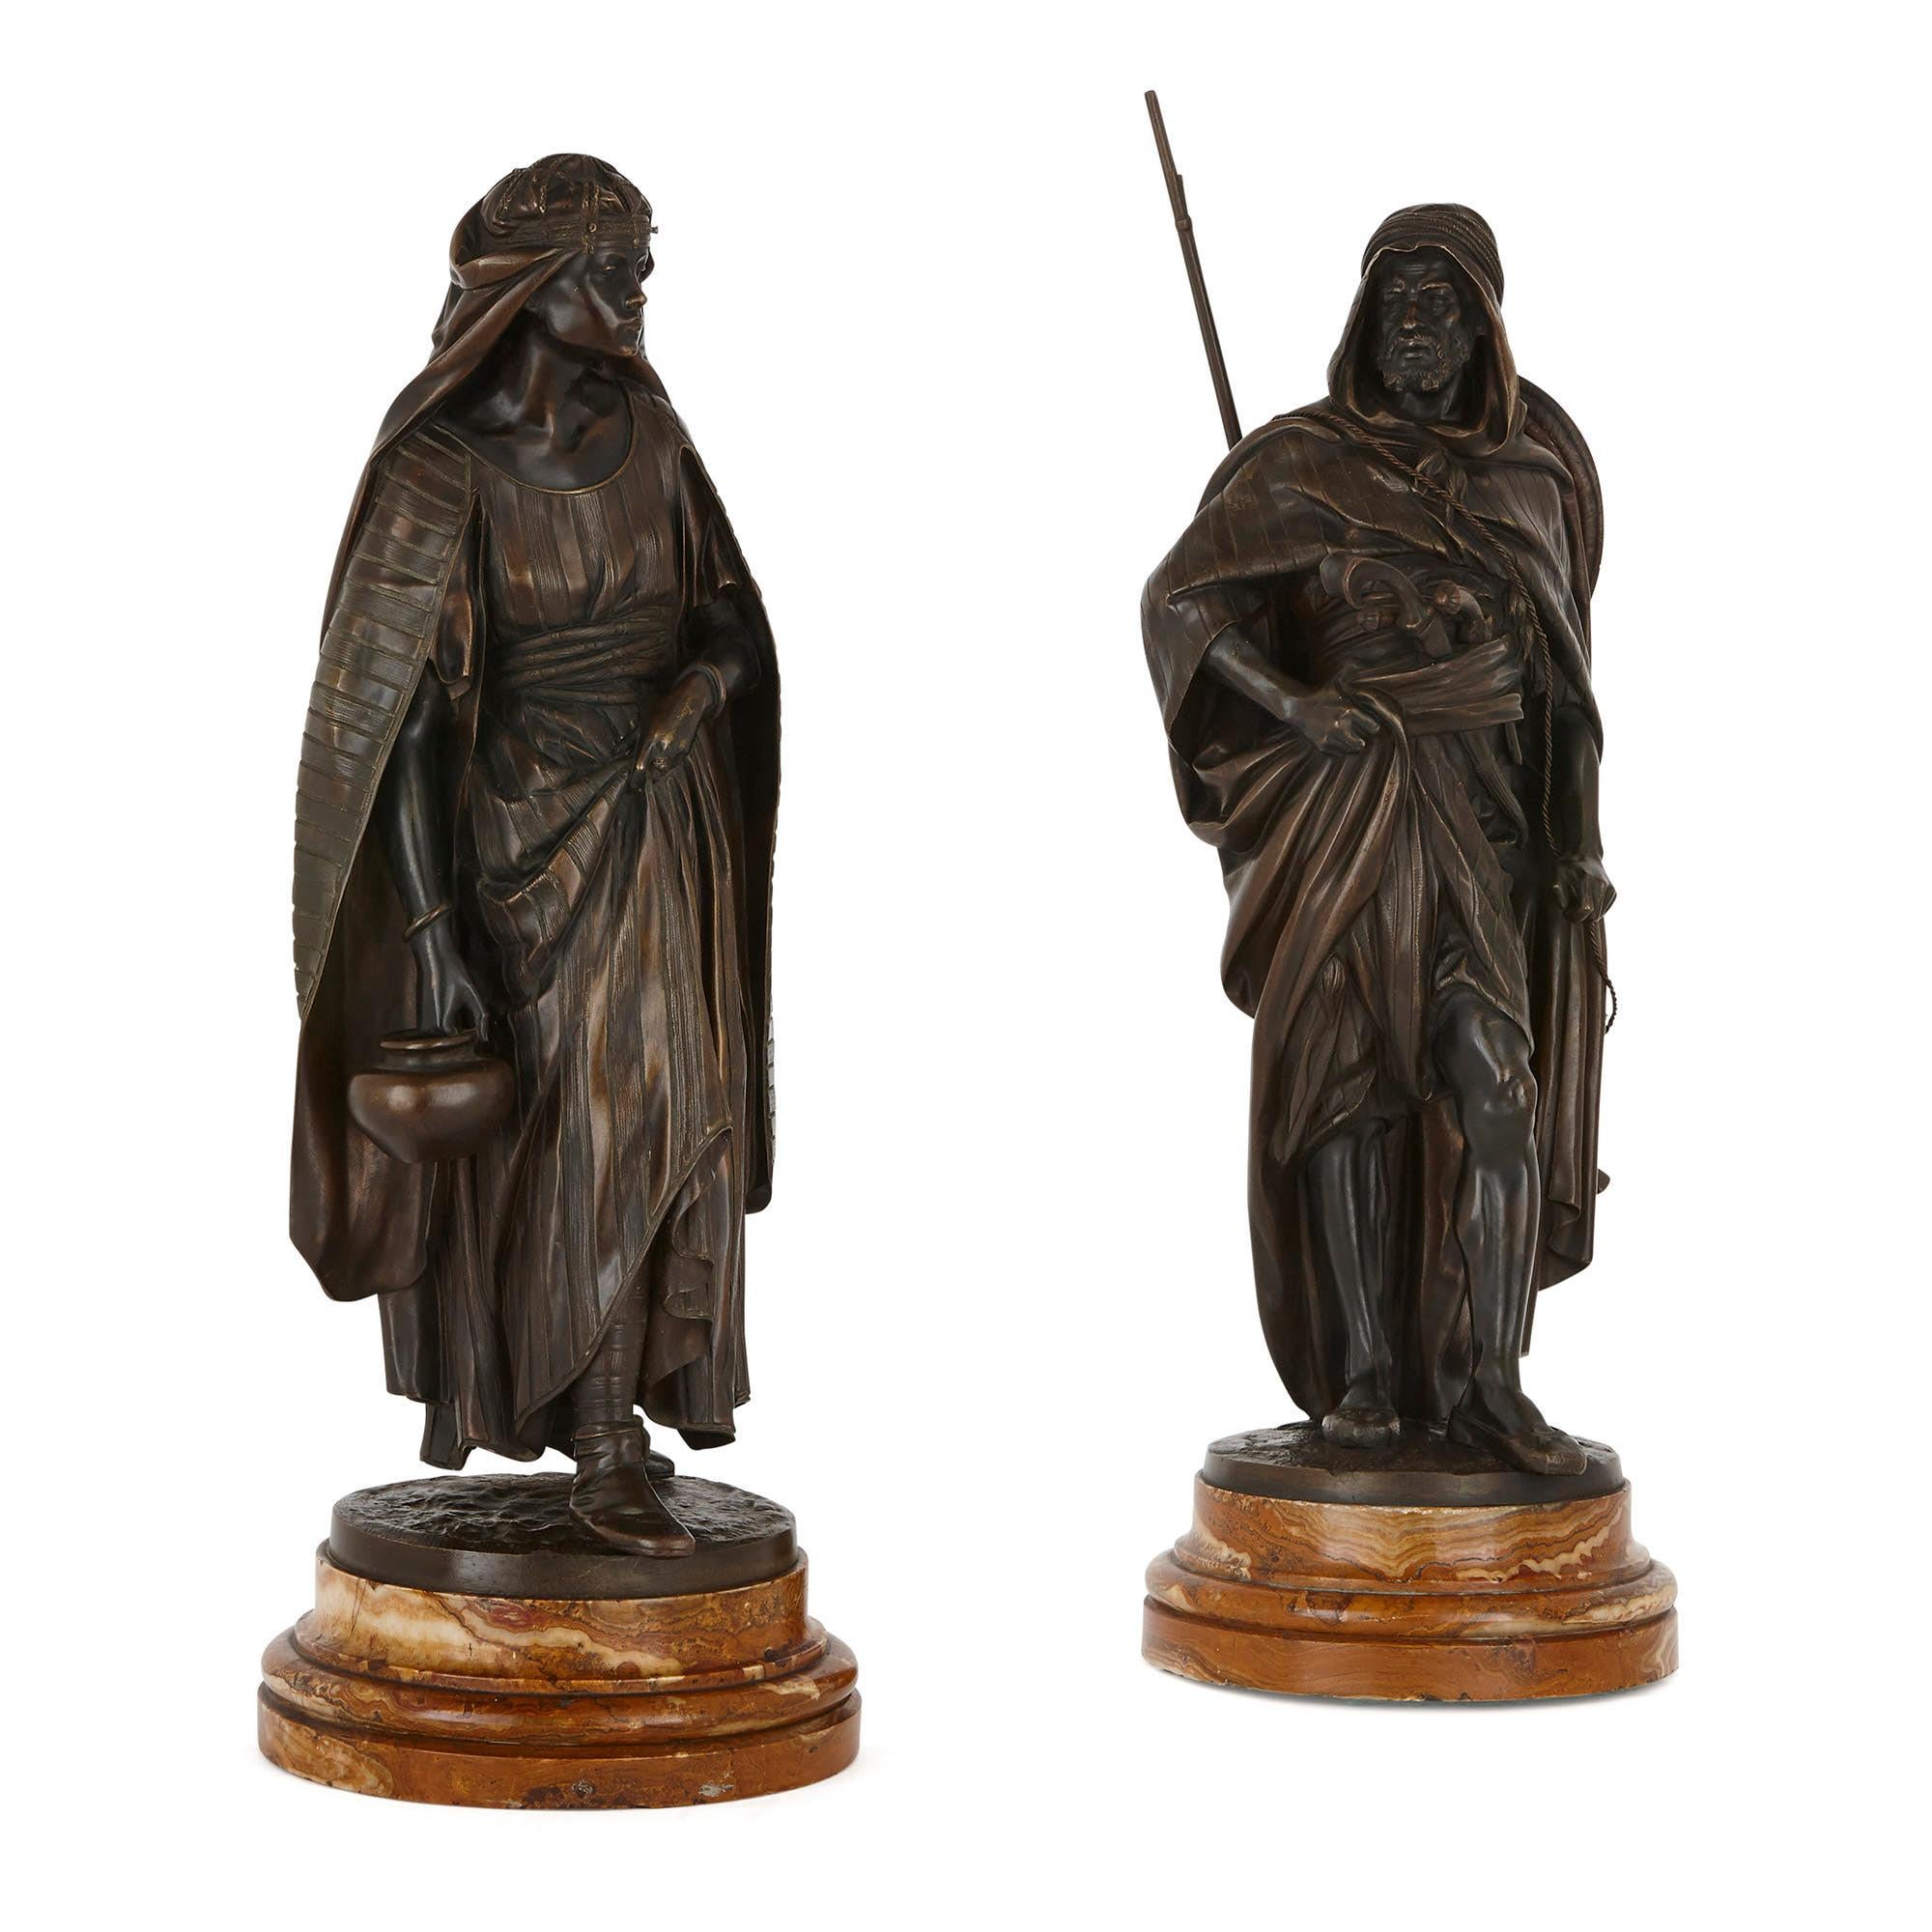 These wonderful patinated bronze sculptures were created in France in the 19th Century when Orientalist art was in fashion. They are the work of the prestigious sculptor, Jean Jules Salmson (French, 1823-1902). Titled ‘La Porteuse’ and ‘Le Guerrier